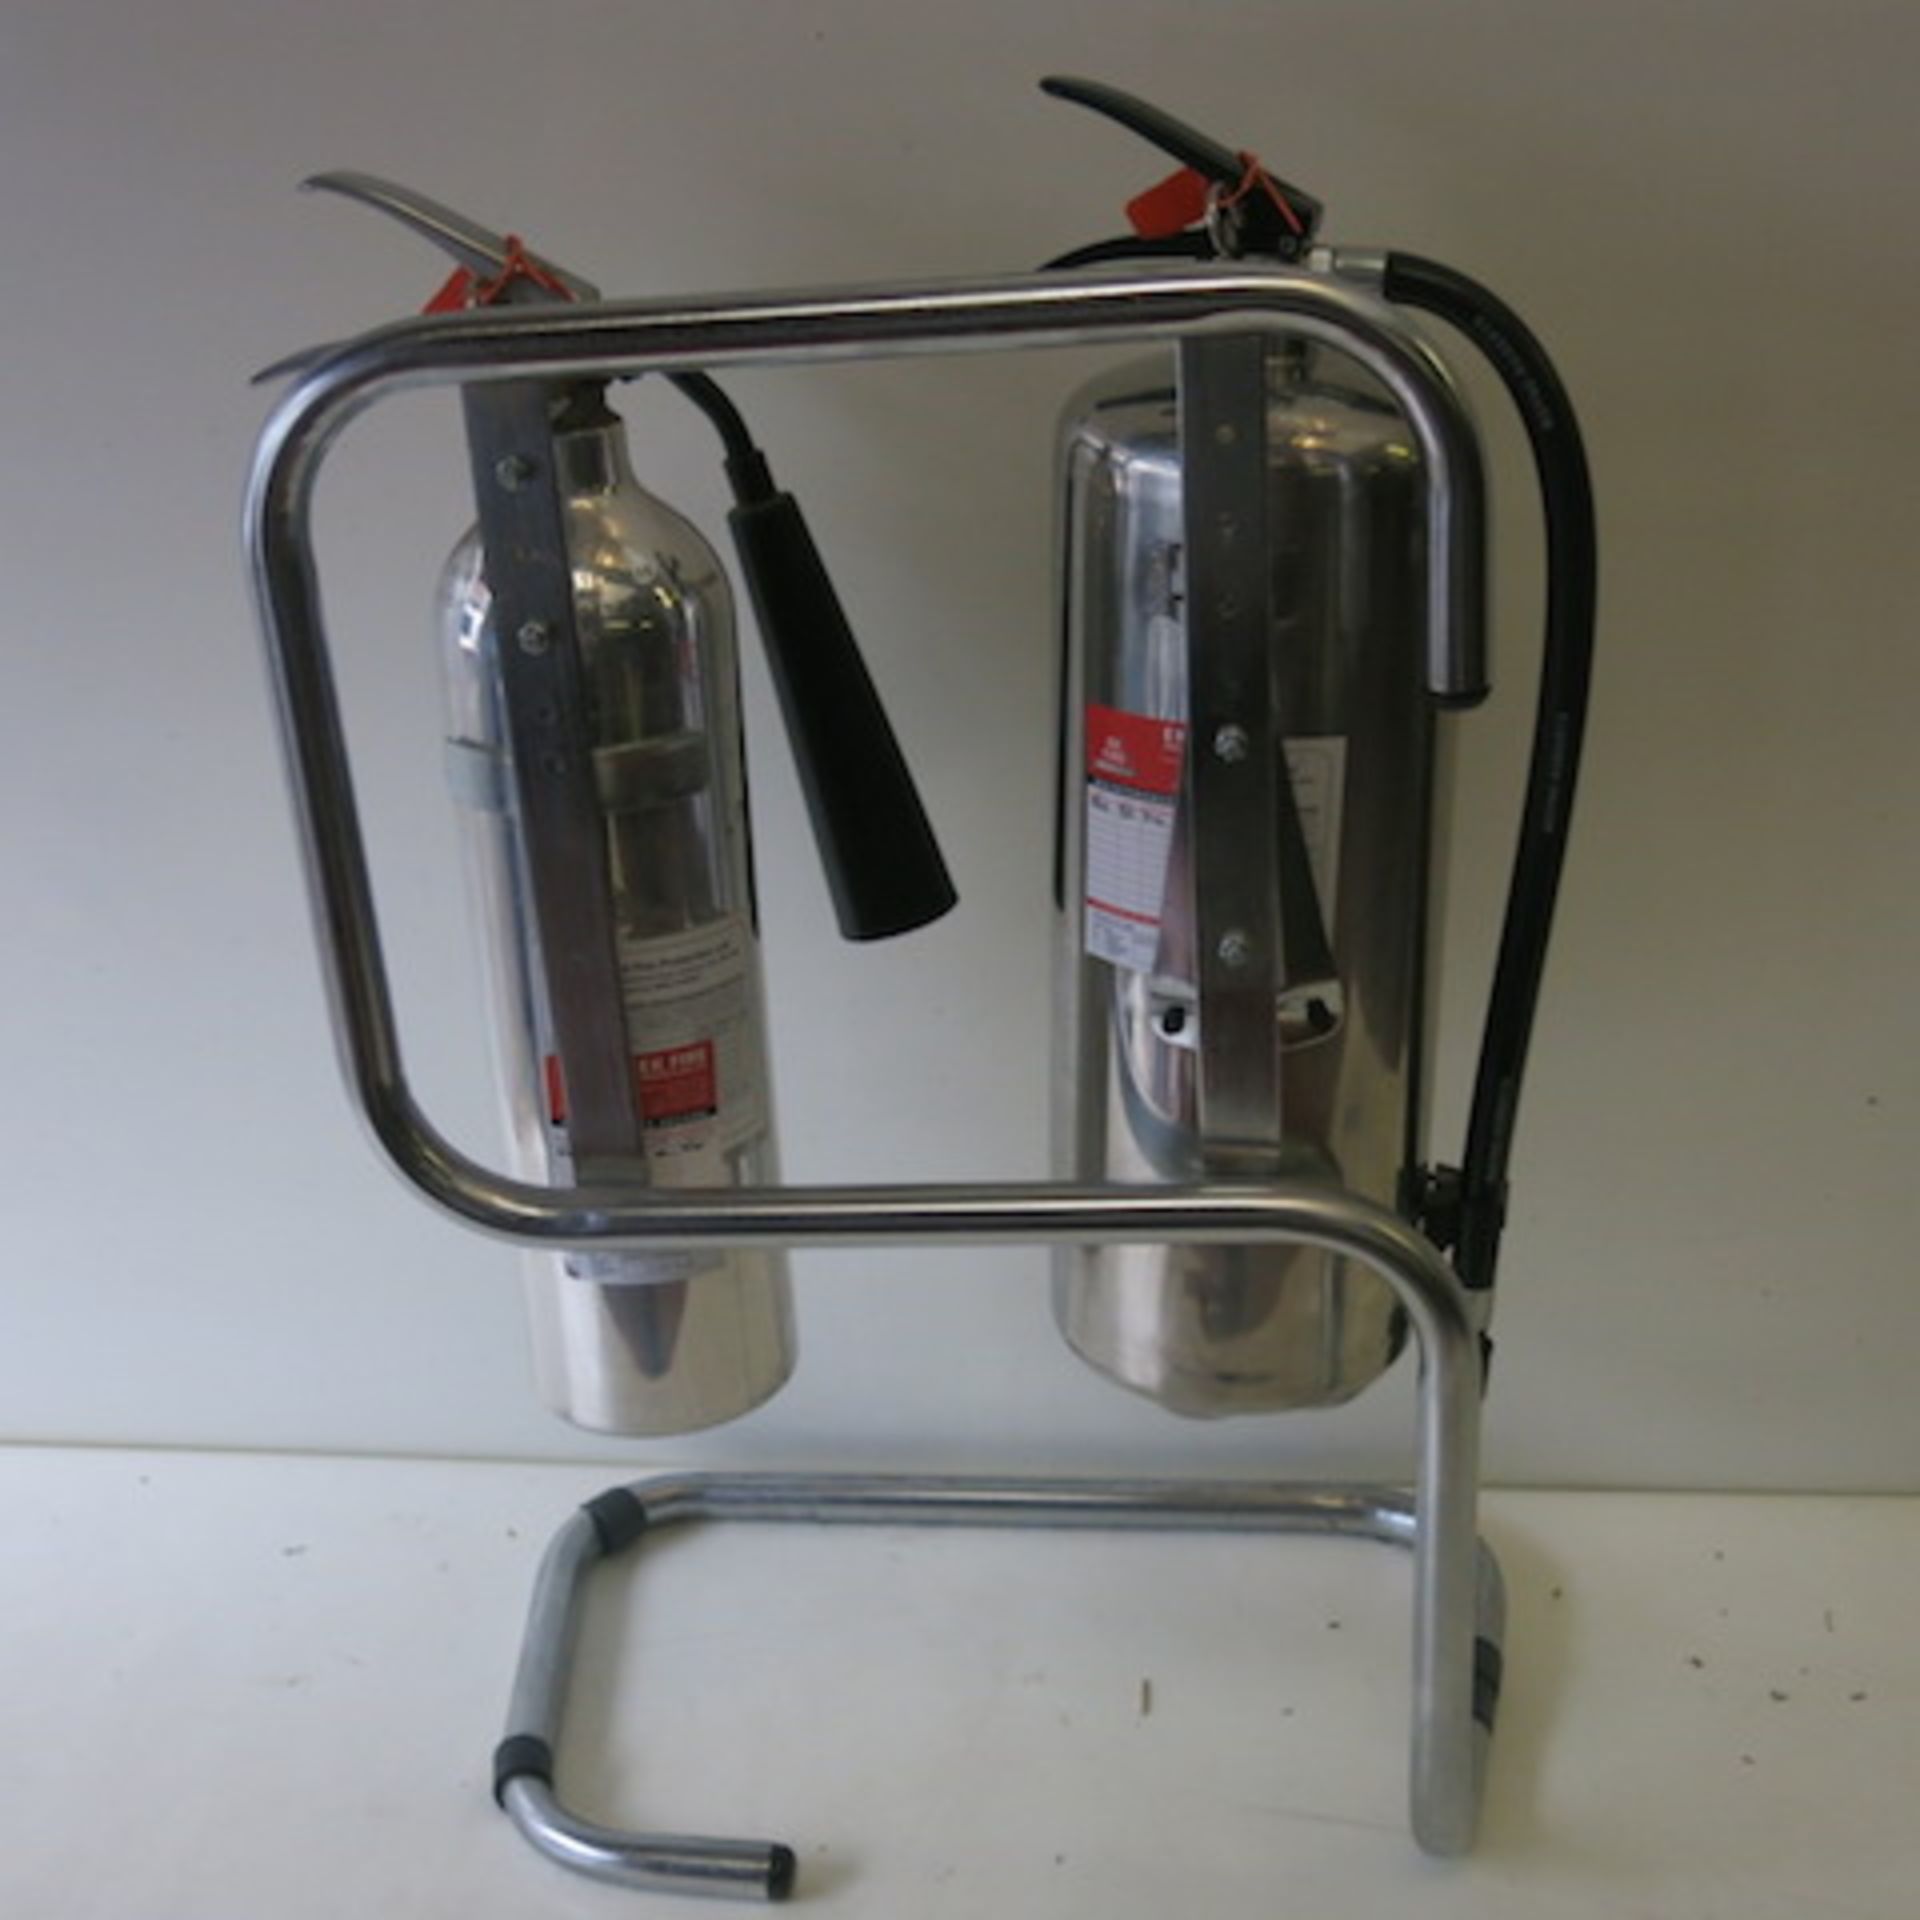 2 x Stainless Steel/Polished Aluminum Fire Extinguishers on Frame, 1 Foam, 1 Carbon Dioxide, - Image 4 of 4